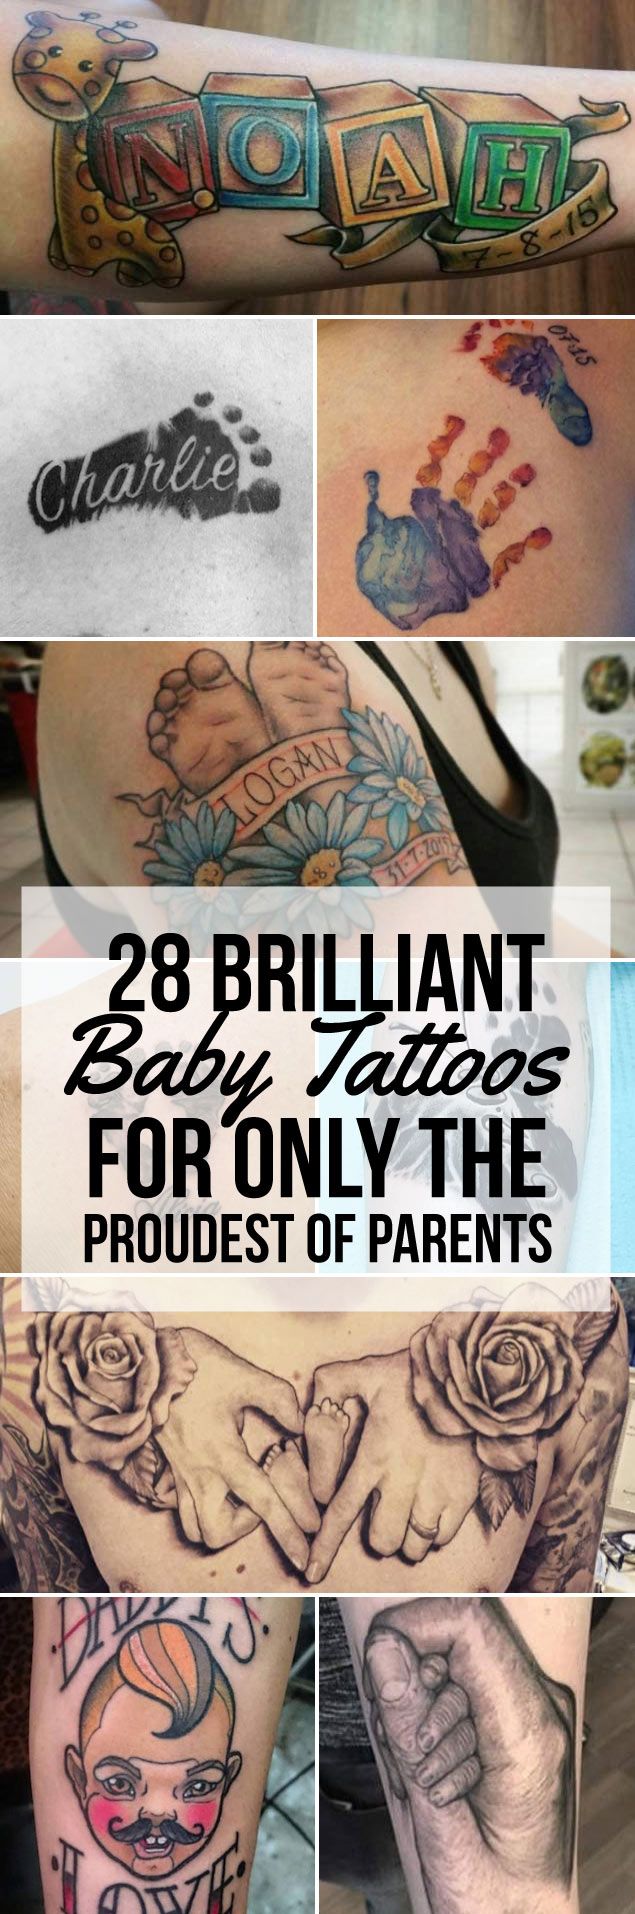 28 Brilliant Baby Tattoos For Only The Proudest of Parents